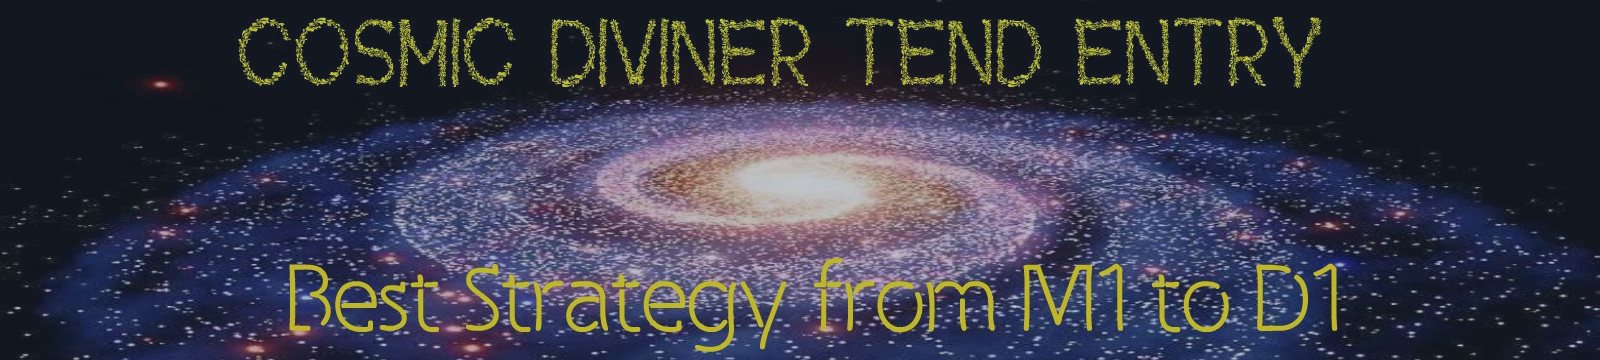 Cosmic Diviner Trend Entry - Best Profit System from M1 to D1